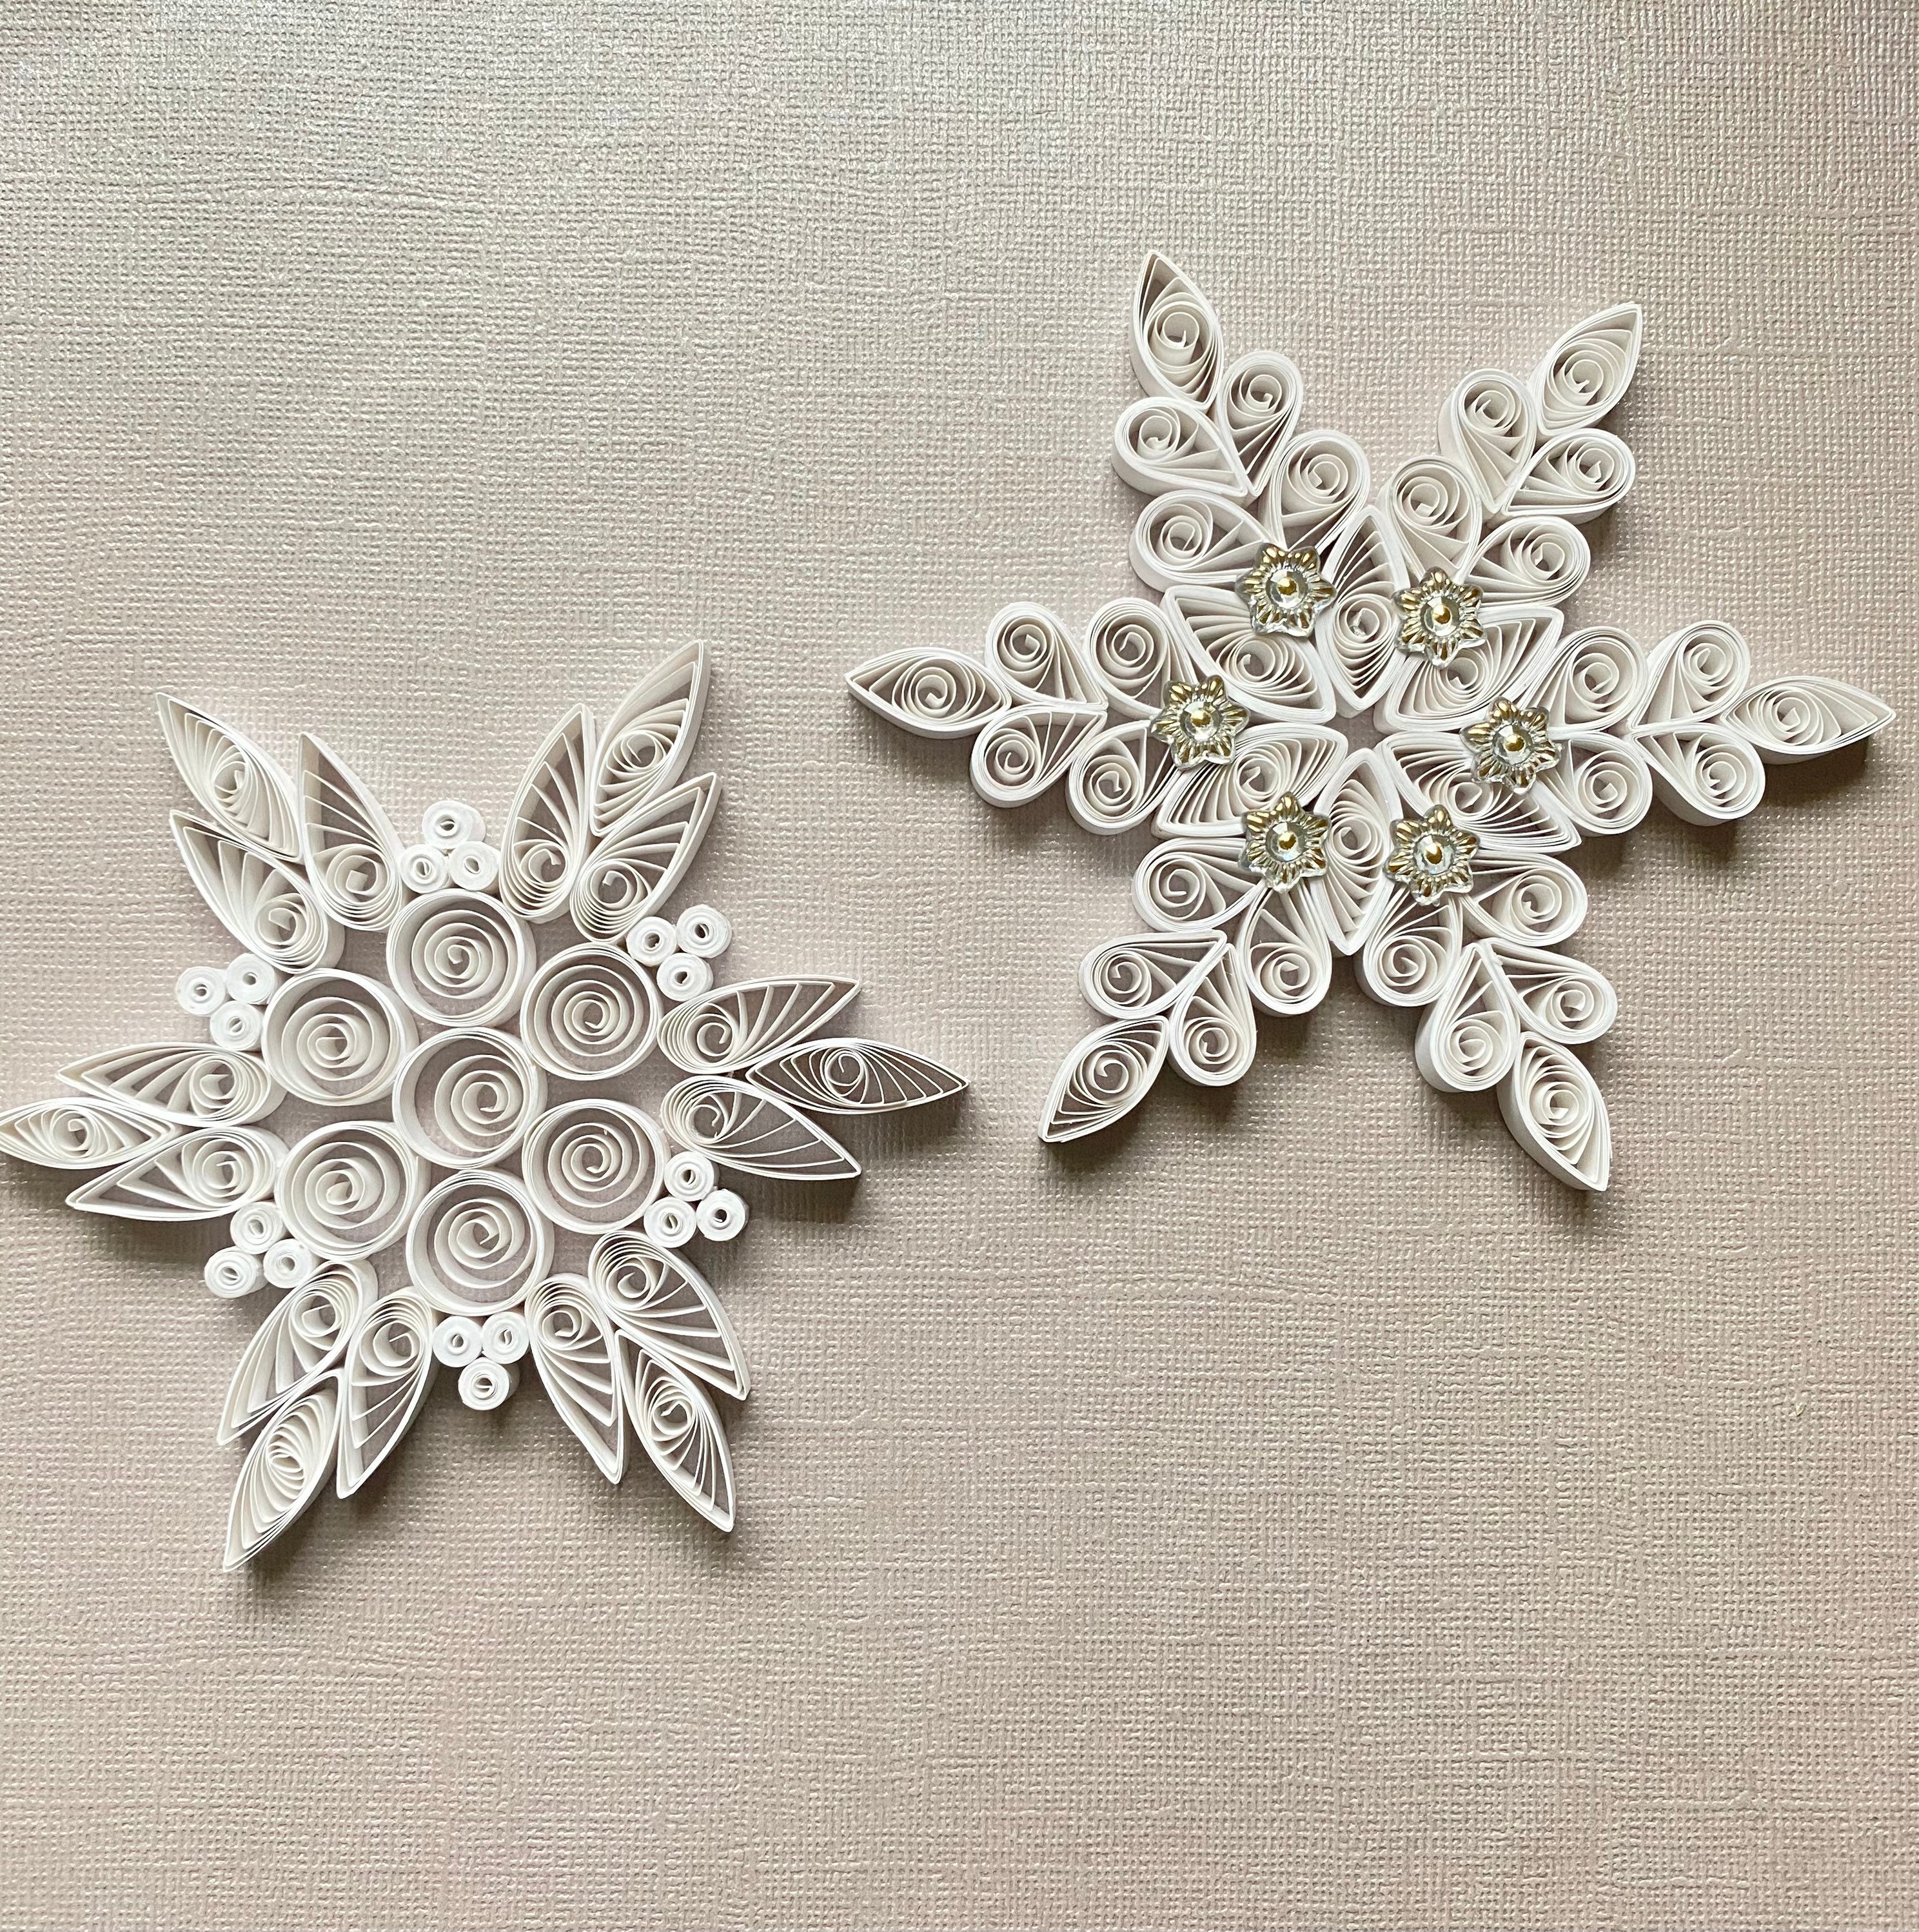 Snowflakes Quilling Kit